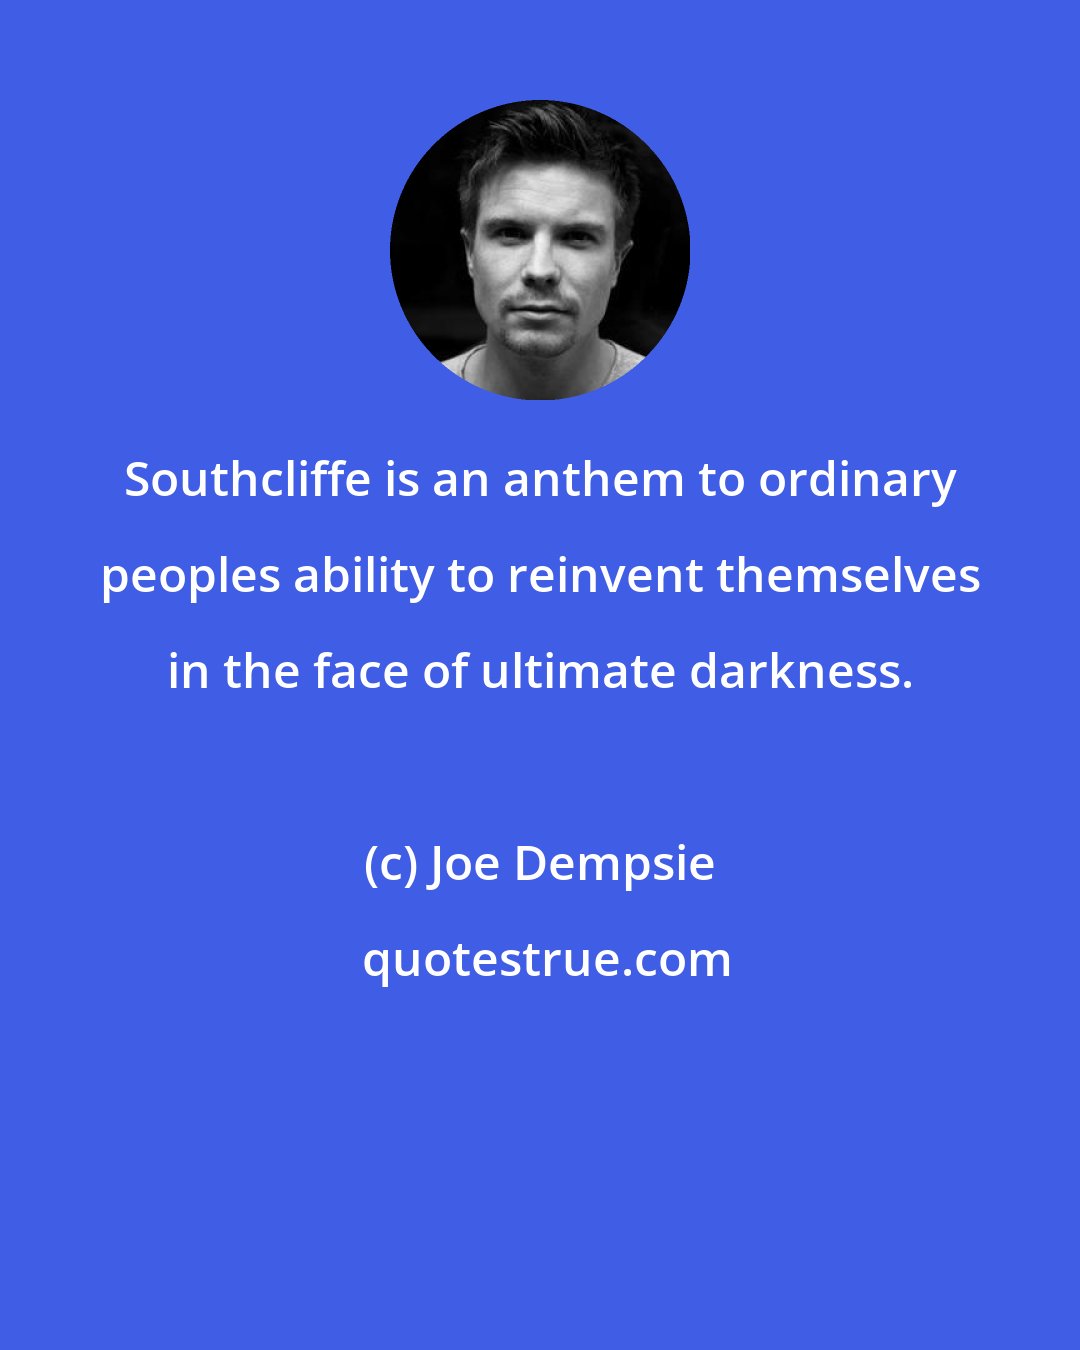 Joe Dempsie: Southcliffe is an anthem to ordinary peoples ability to reinvent themselves in the face of ultimate darkness.